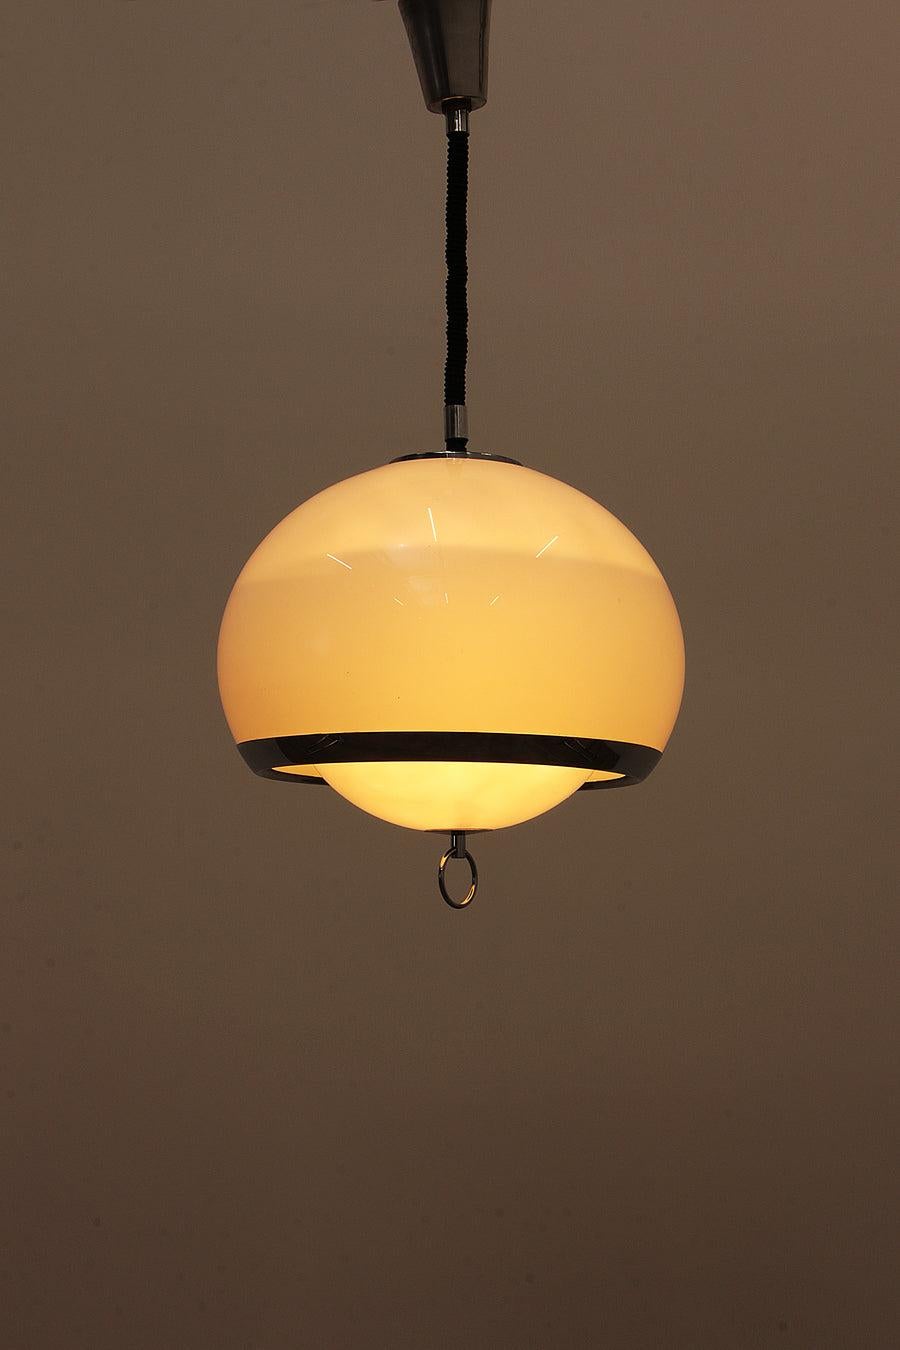 Opaline Space Age German Pendant Lamp With Harmonica Cord

Cool opaline space age German hanging lamp from the 1960s.

This German hanging lamp has an opaline color with a silver edge.

The lamp consists of one large and one small sphere pushed